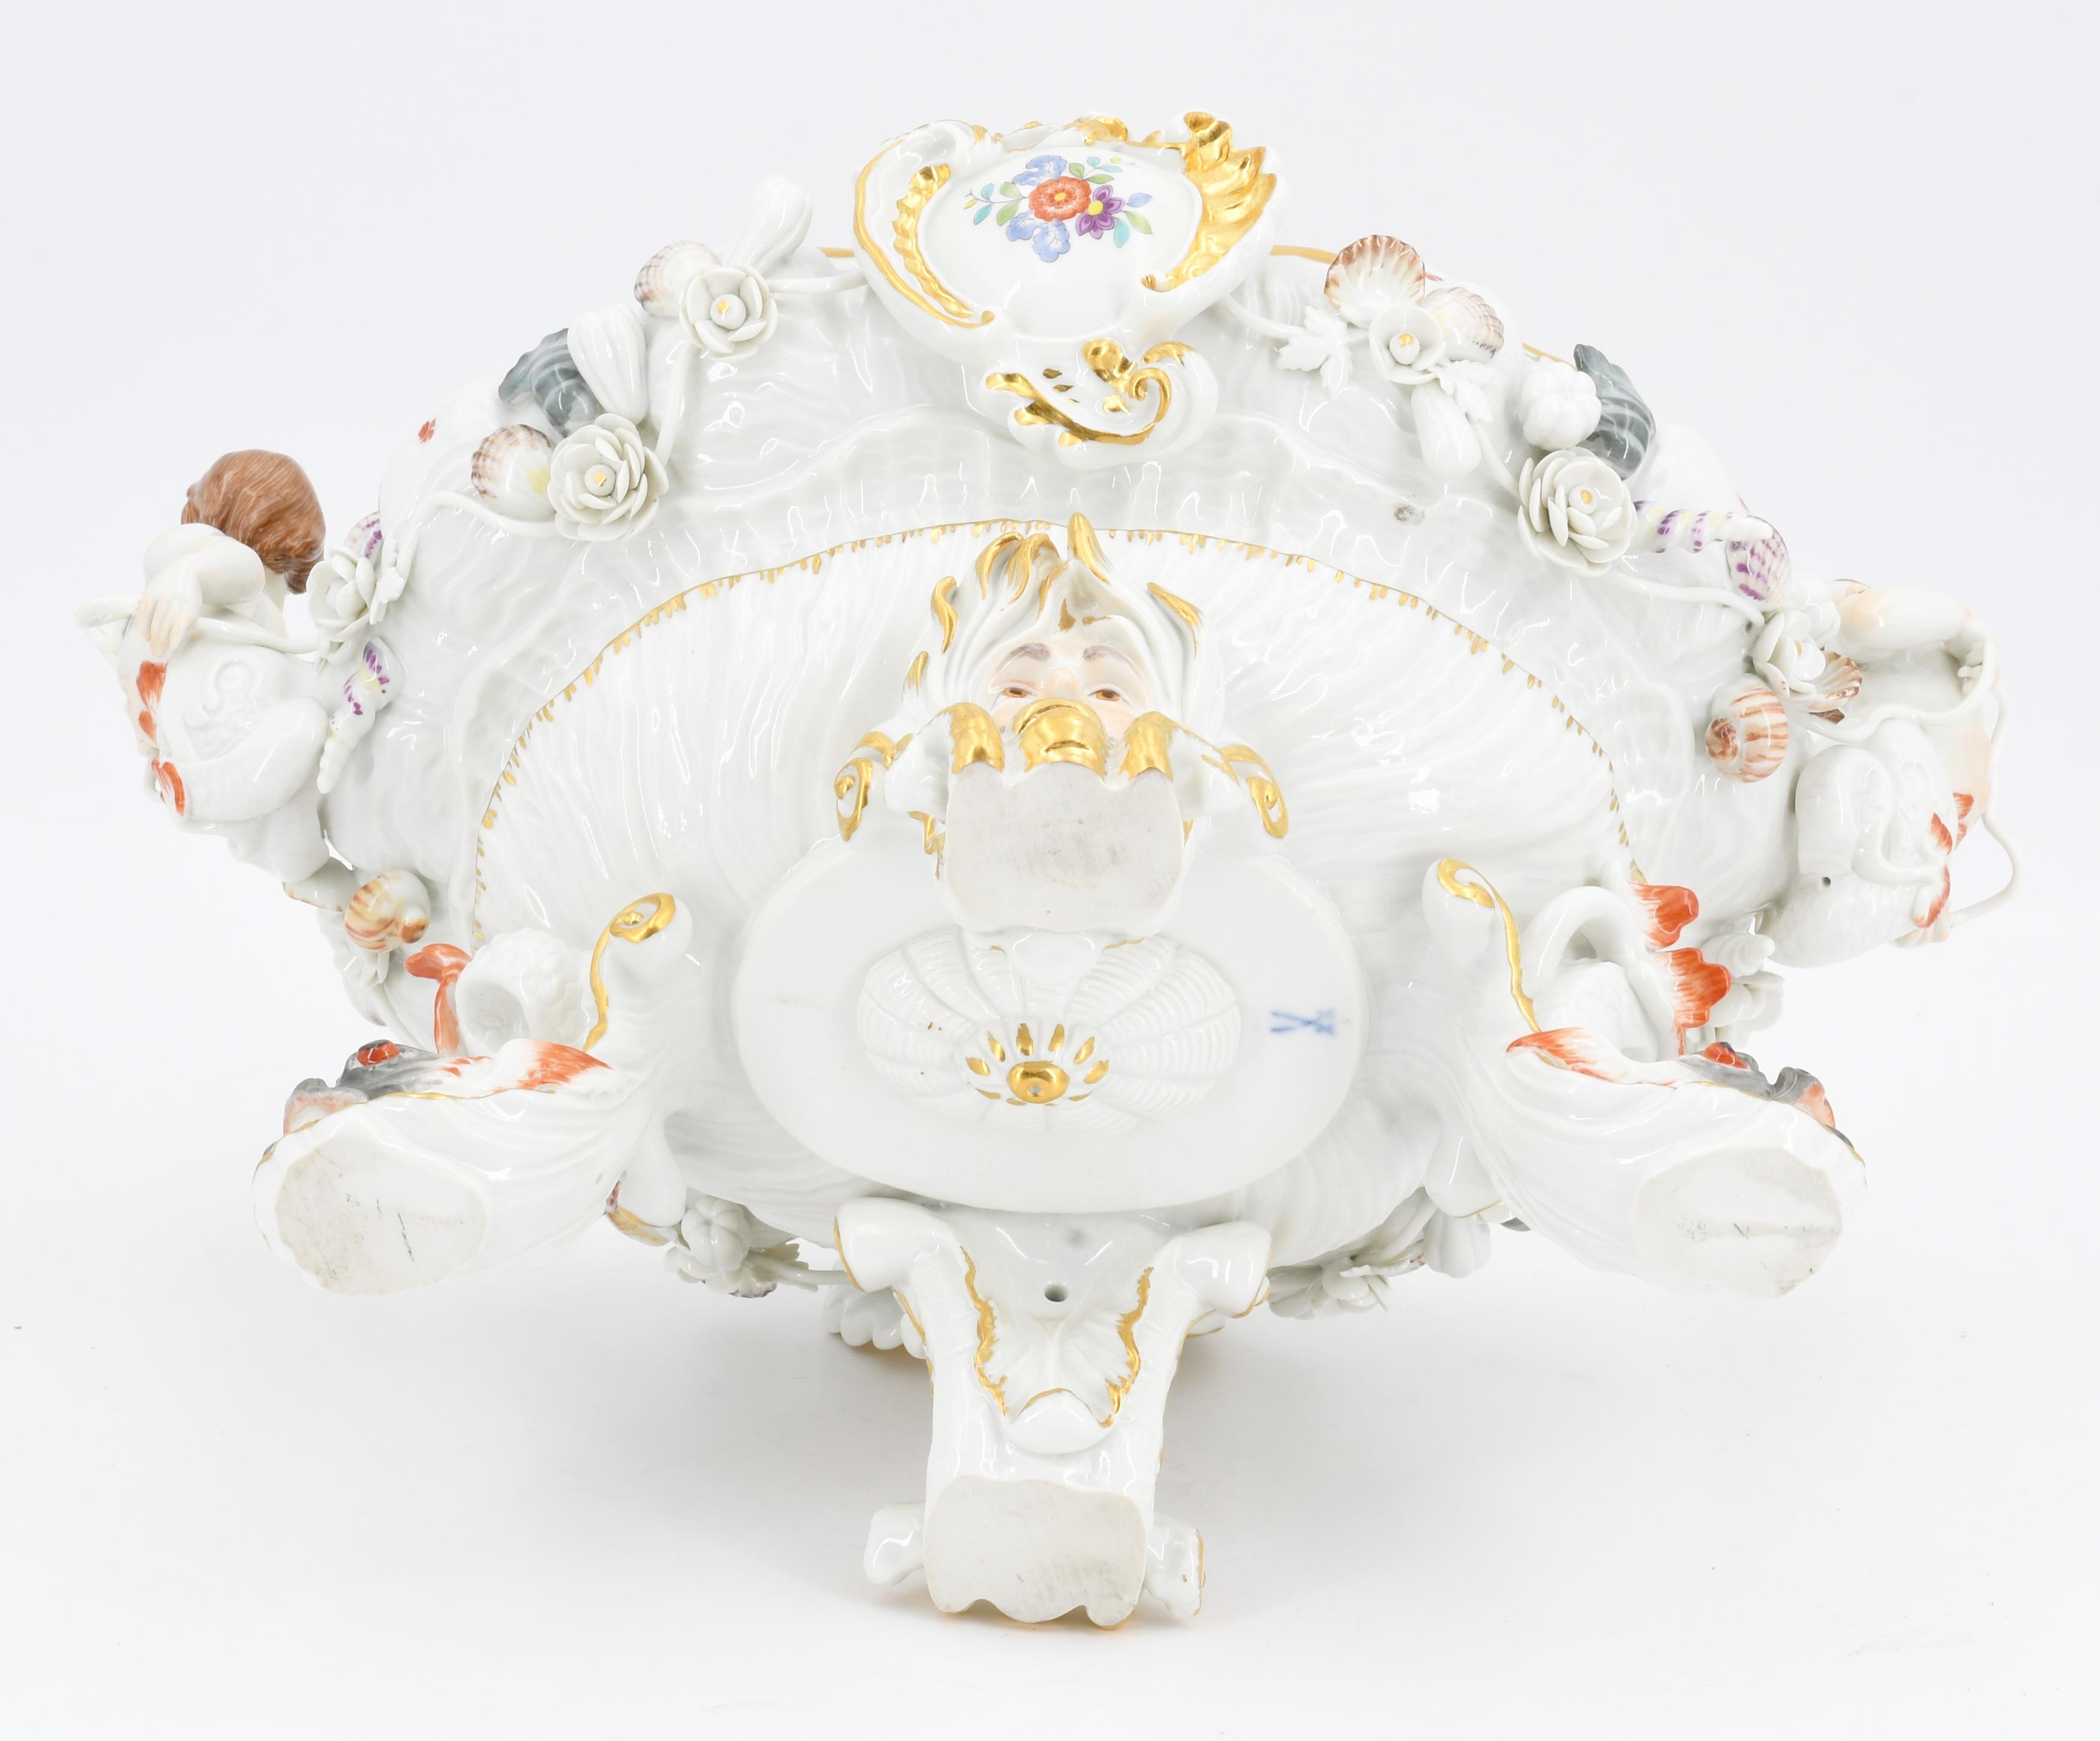 Tureen with Acis and Galathea from the Swan Service - Image 6 of 7